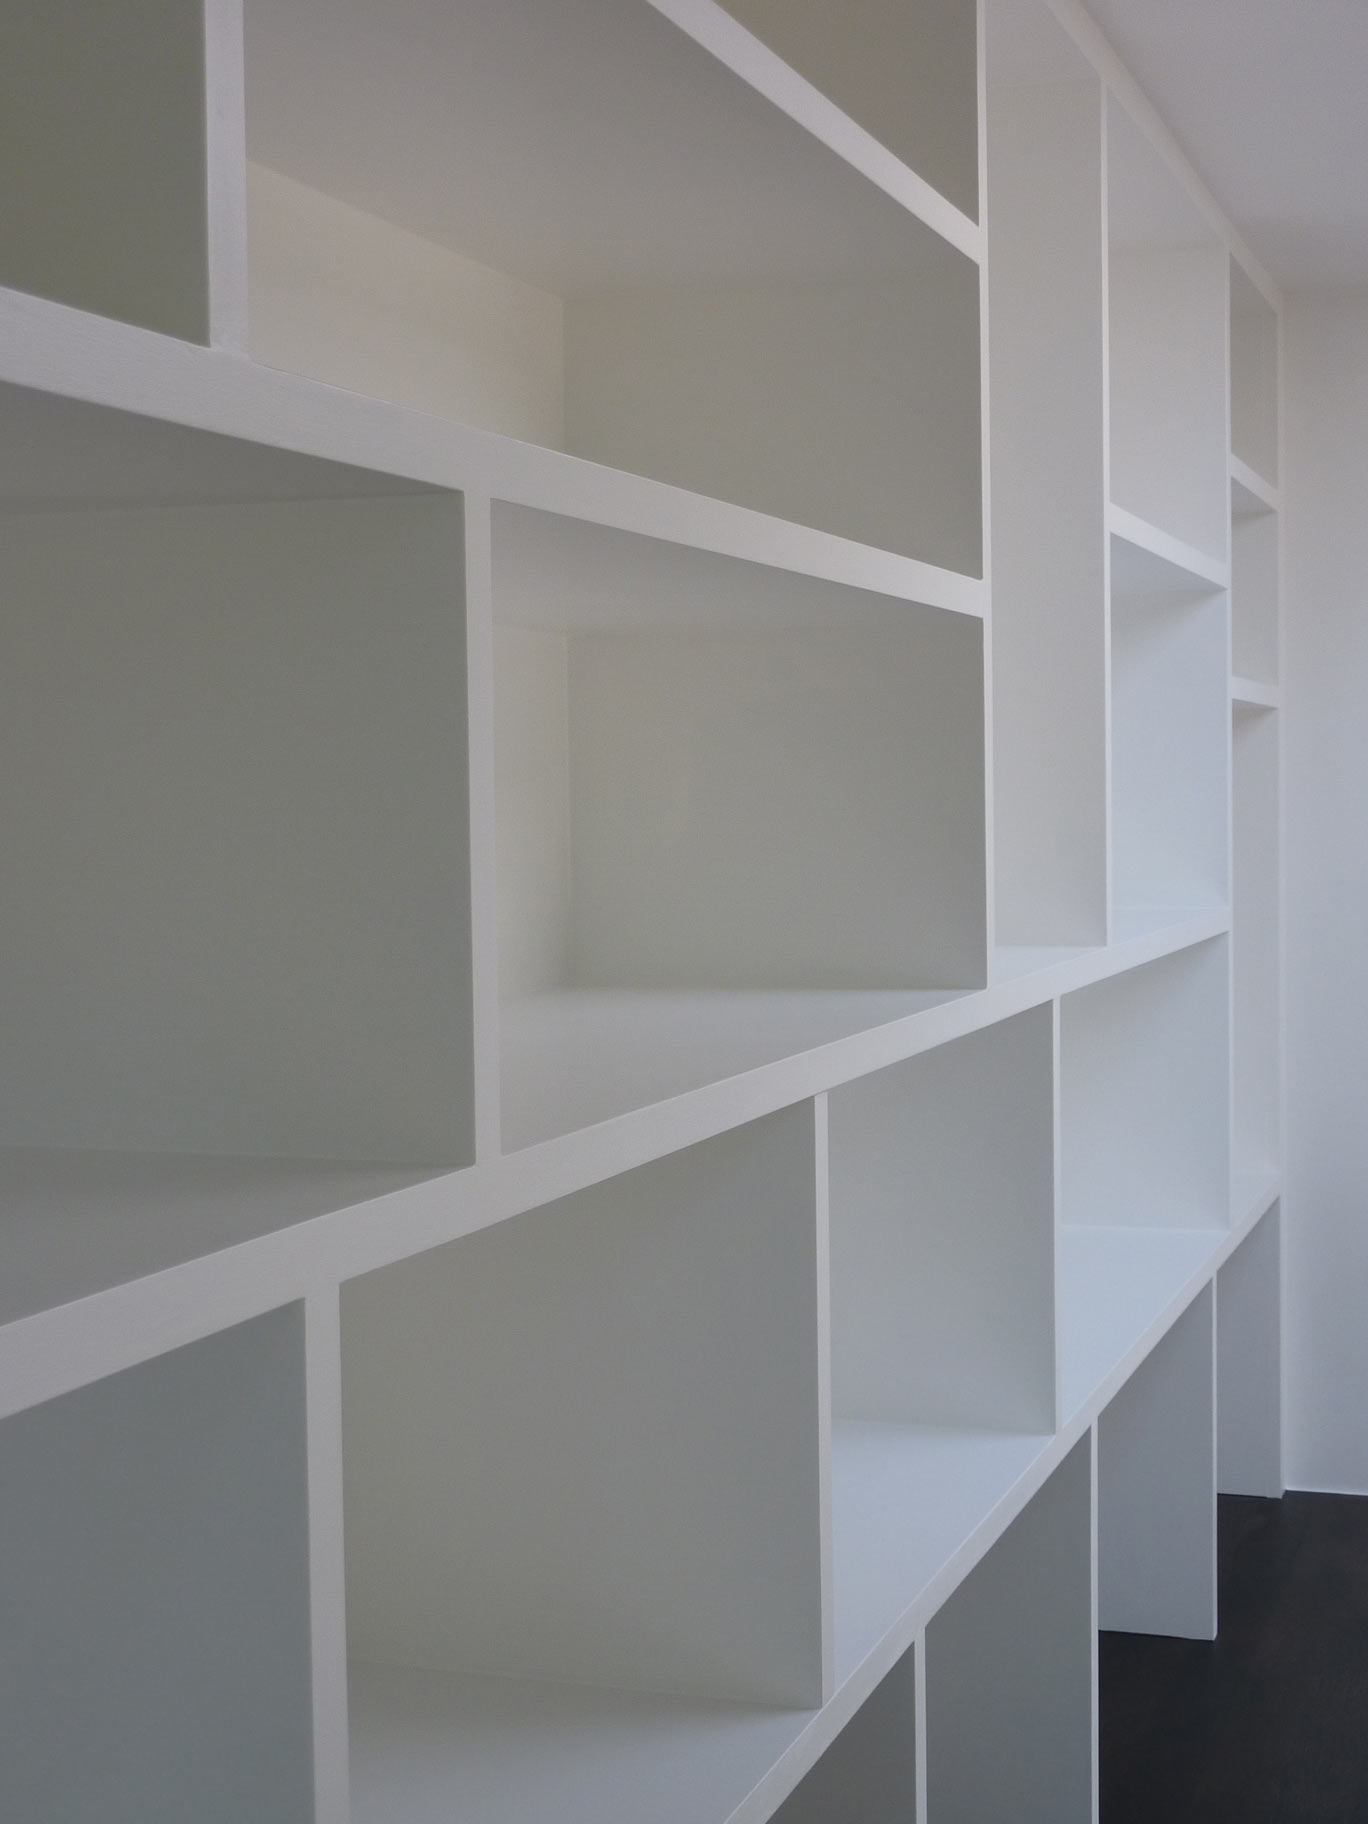 handmade bookcase with pigeon-hole shelving style for bespoke home office